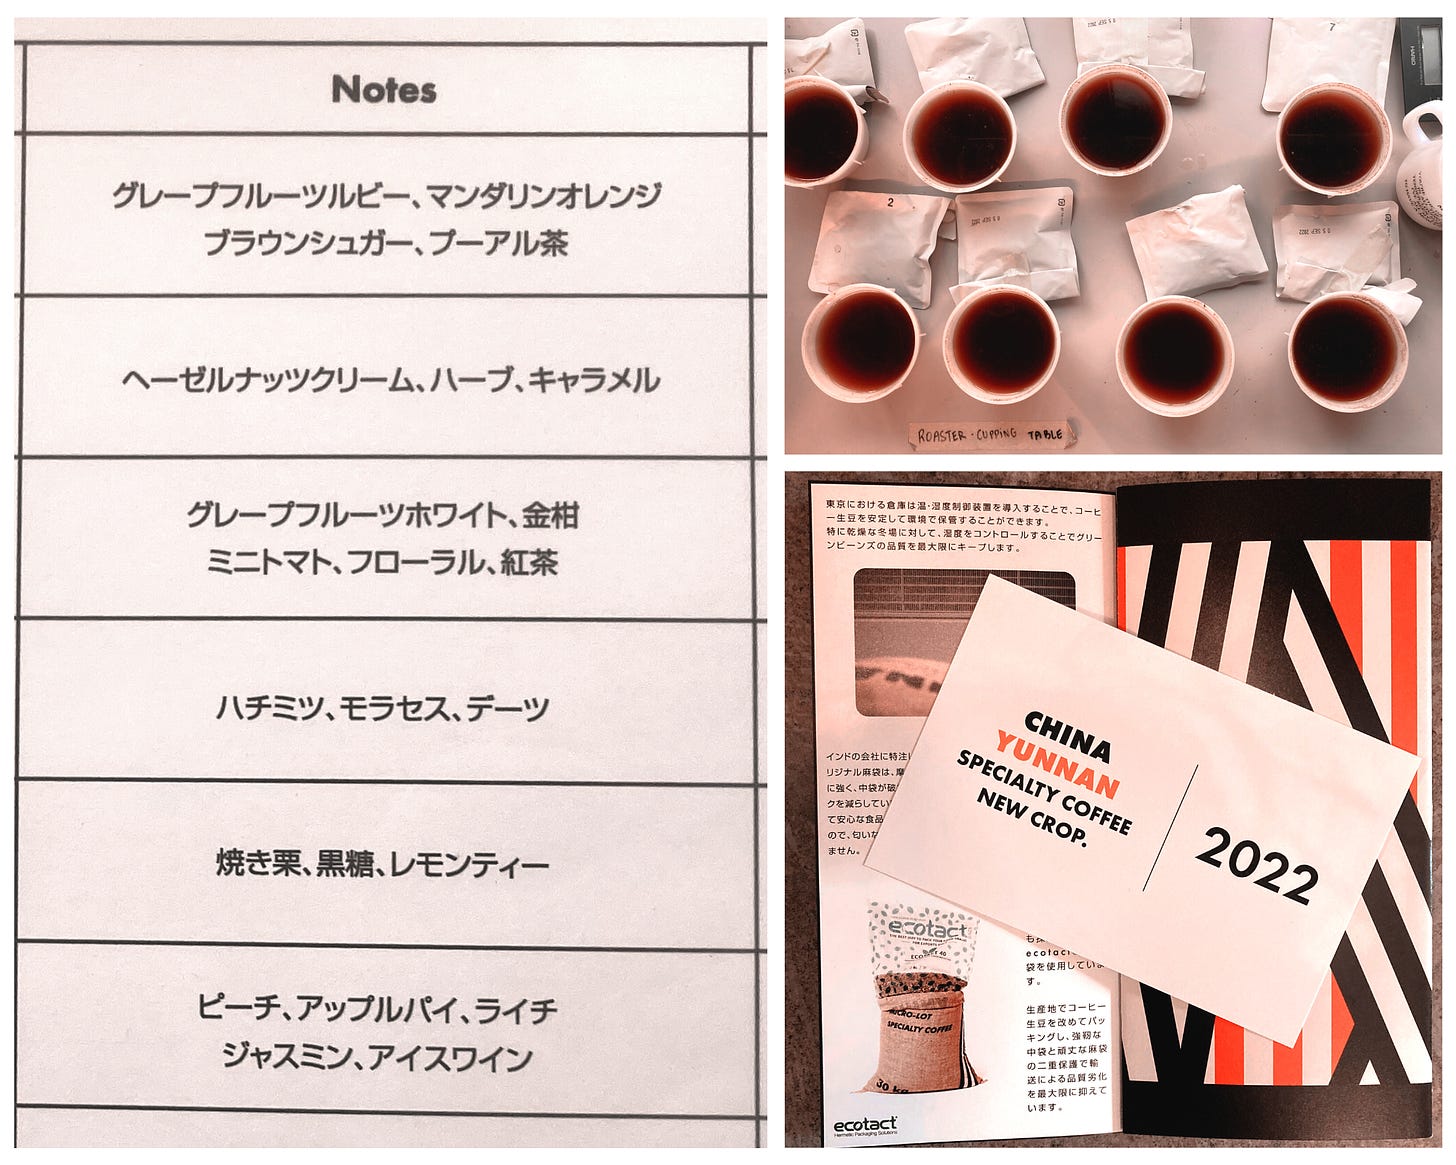 Coffee kit + cupping session